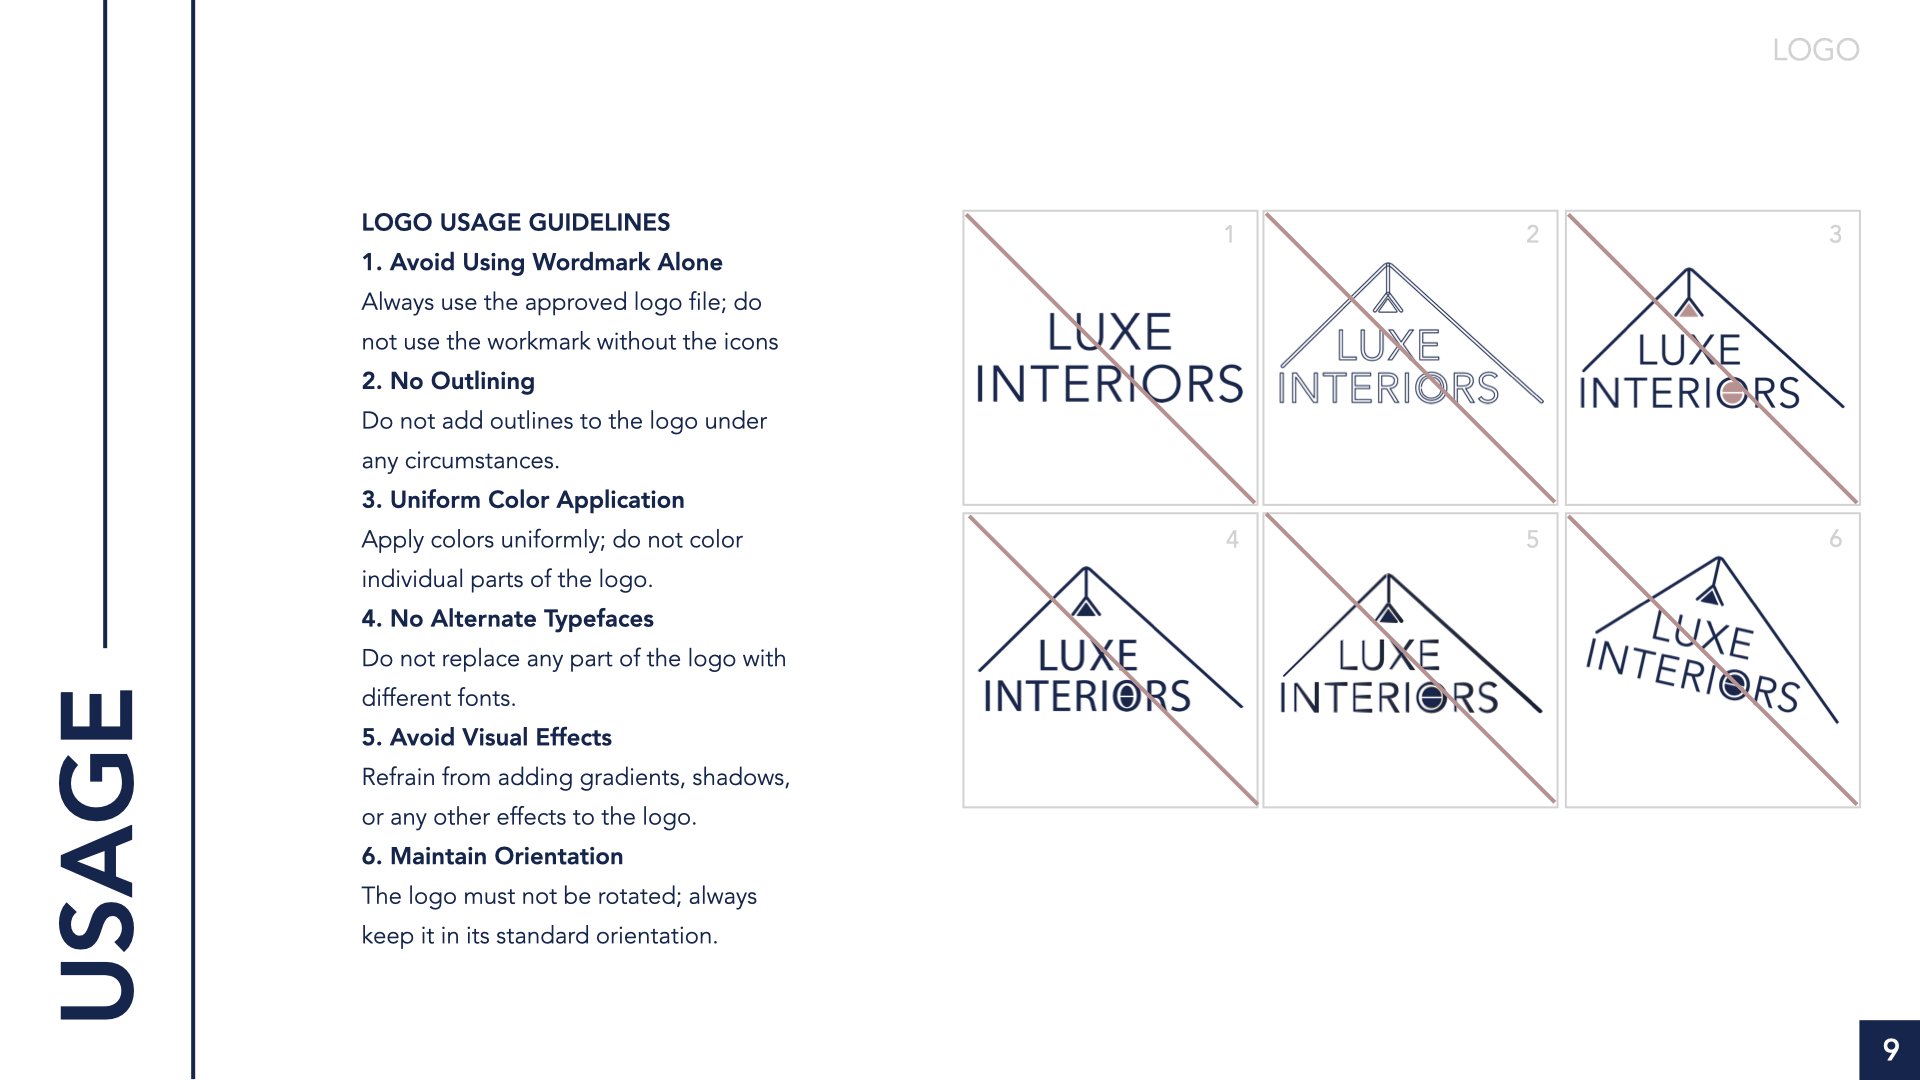 ‎Luxe Interiors Brand Guidlines.‎009.jpeg